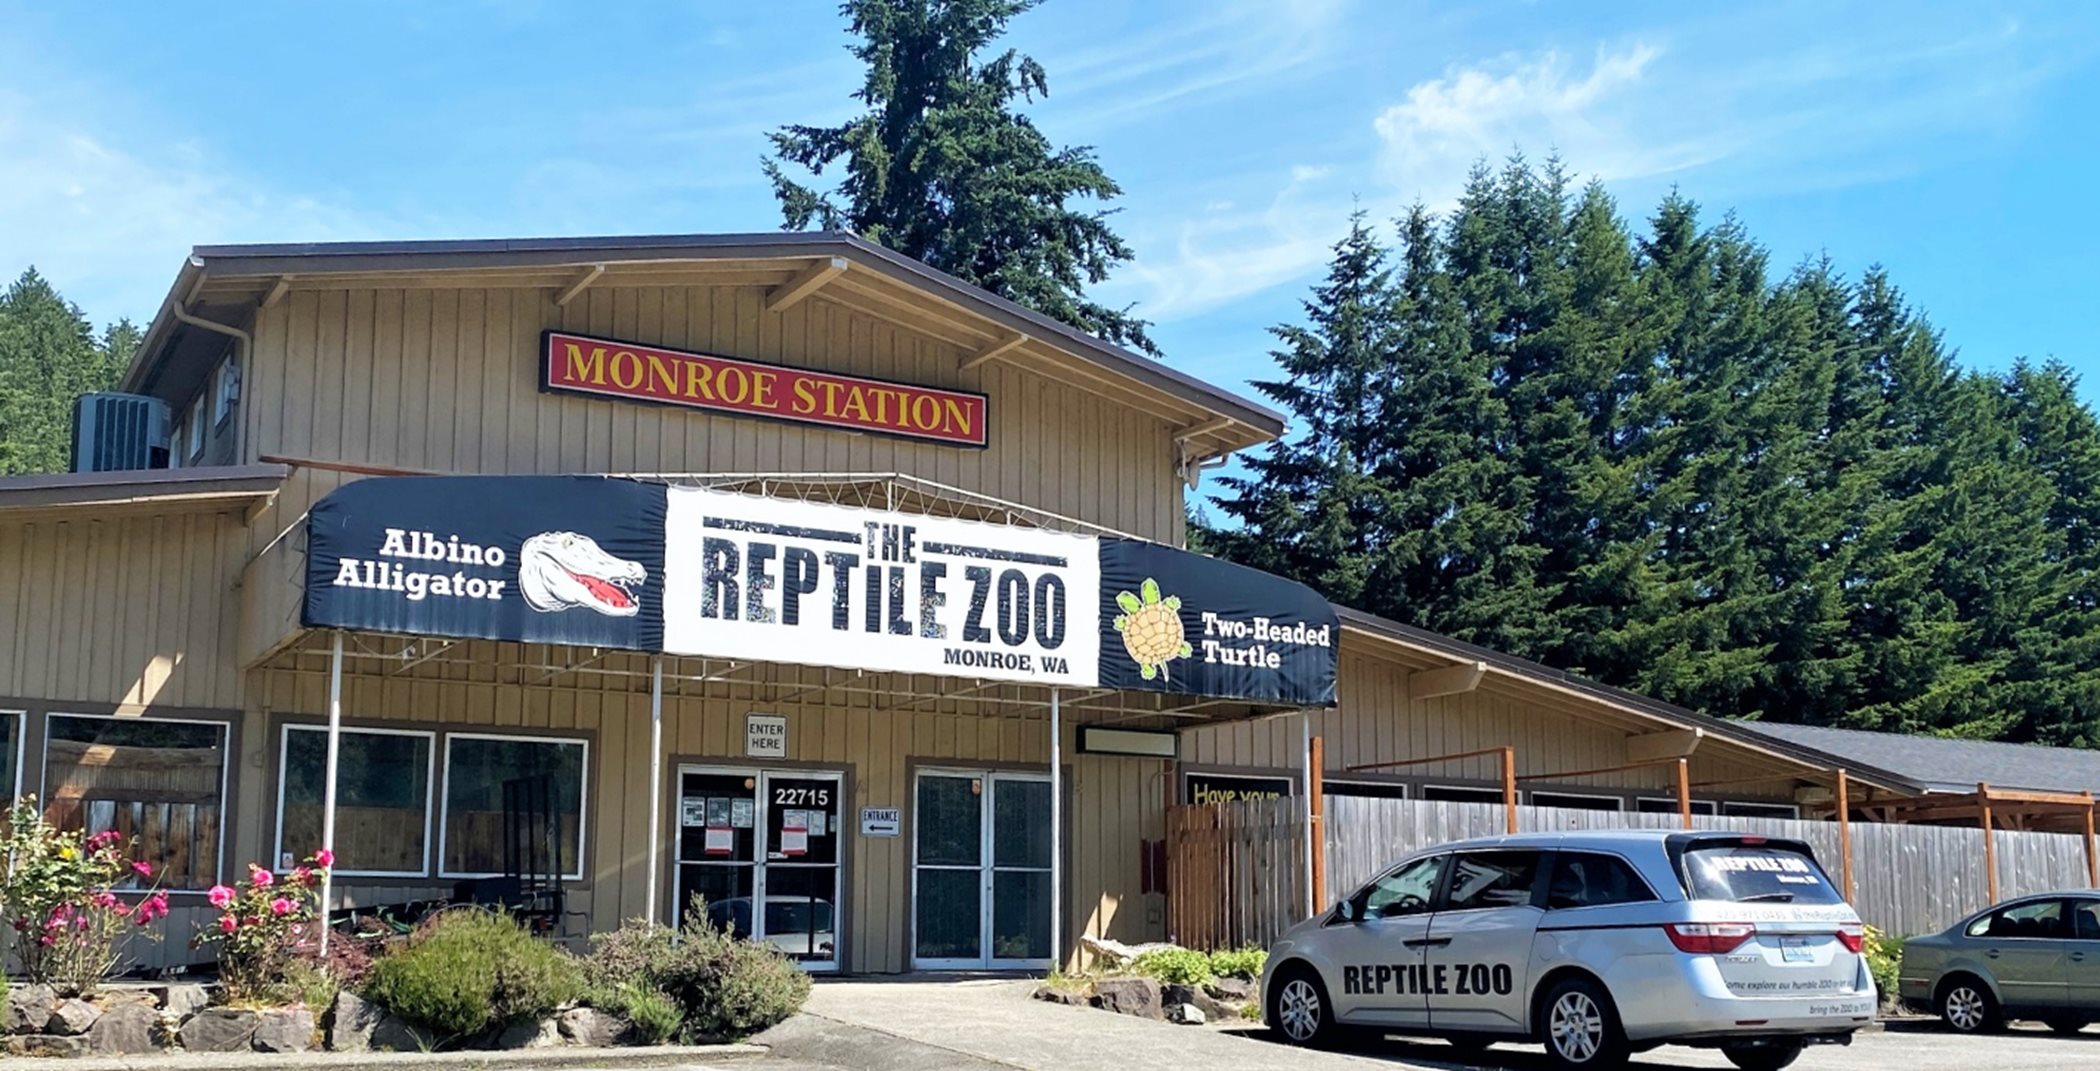 Front entrance to the reptile zoo